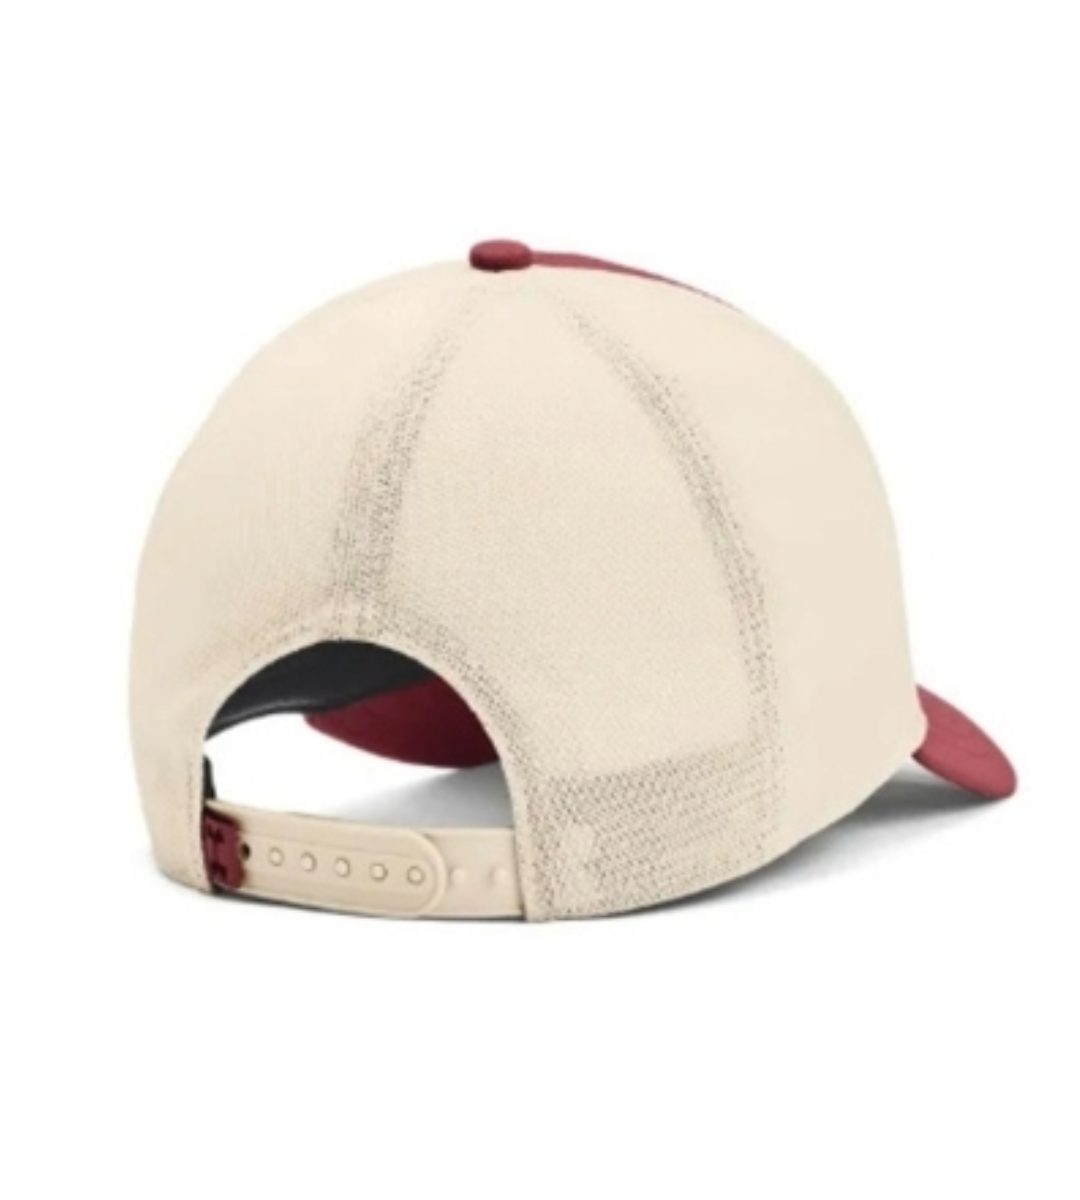 Gorra Project Rock 1369815-130 (Gr/Ng) Under Armour